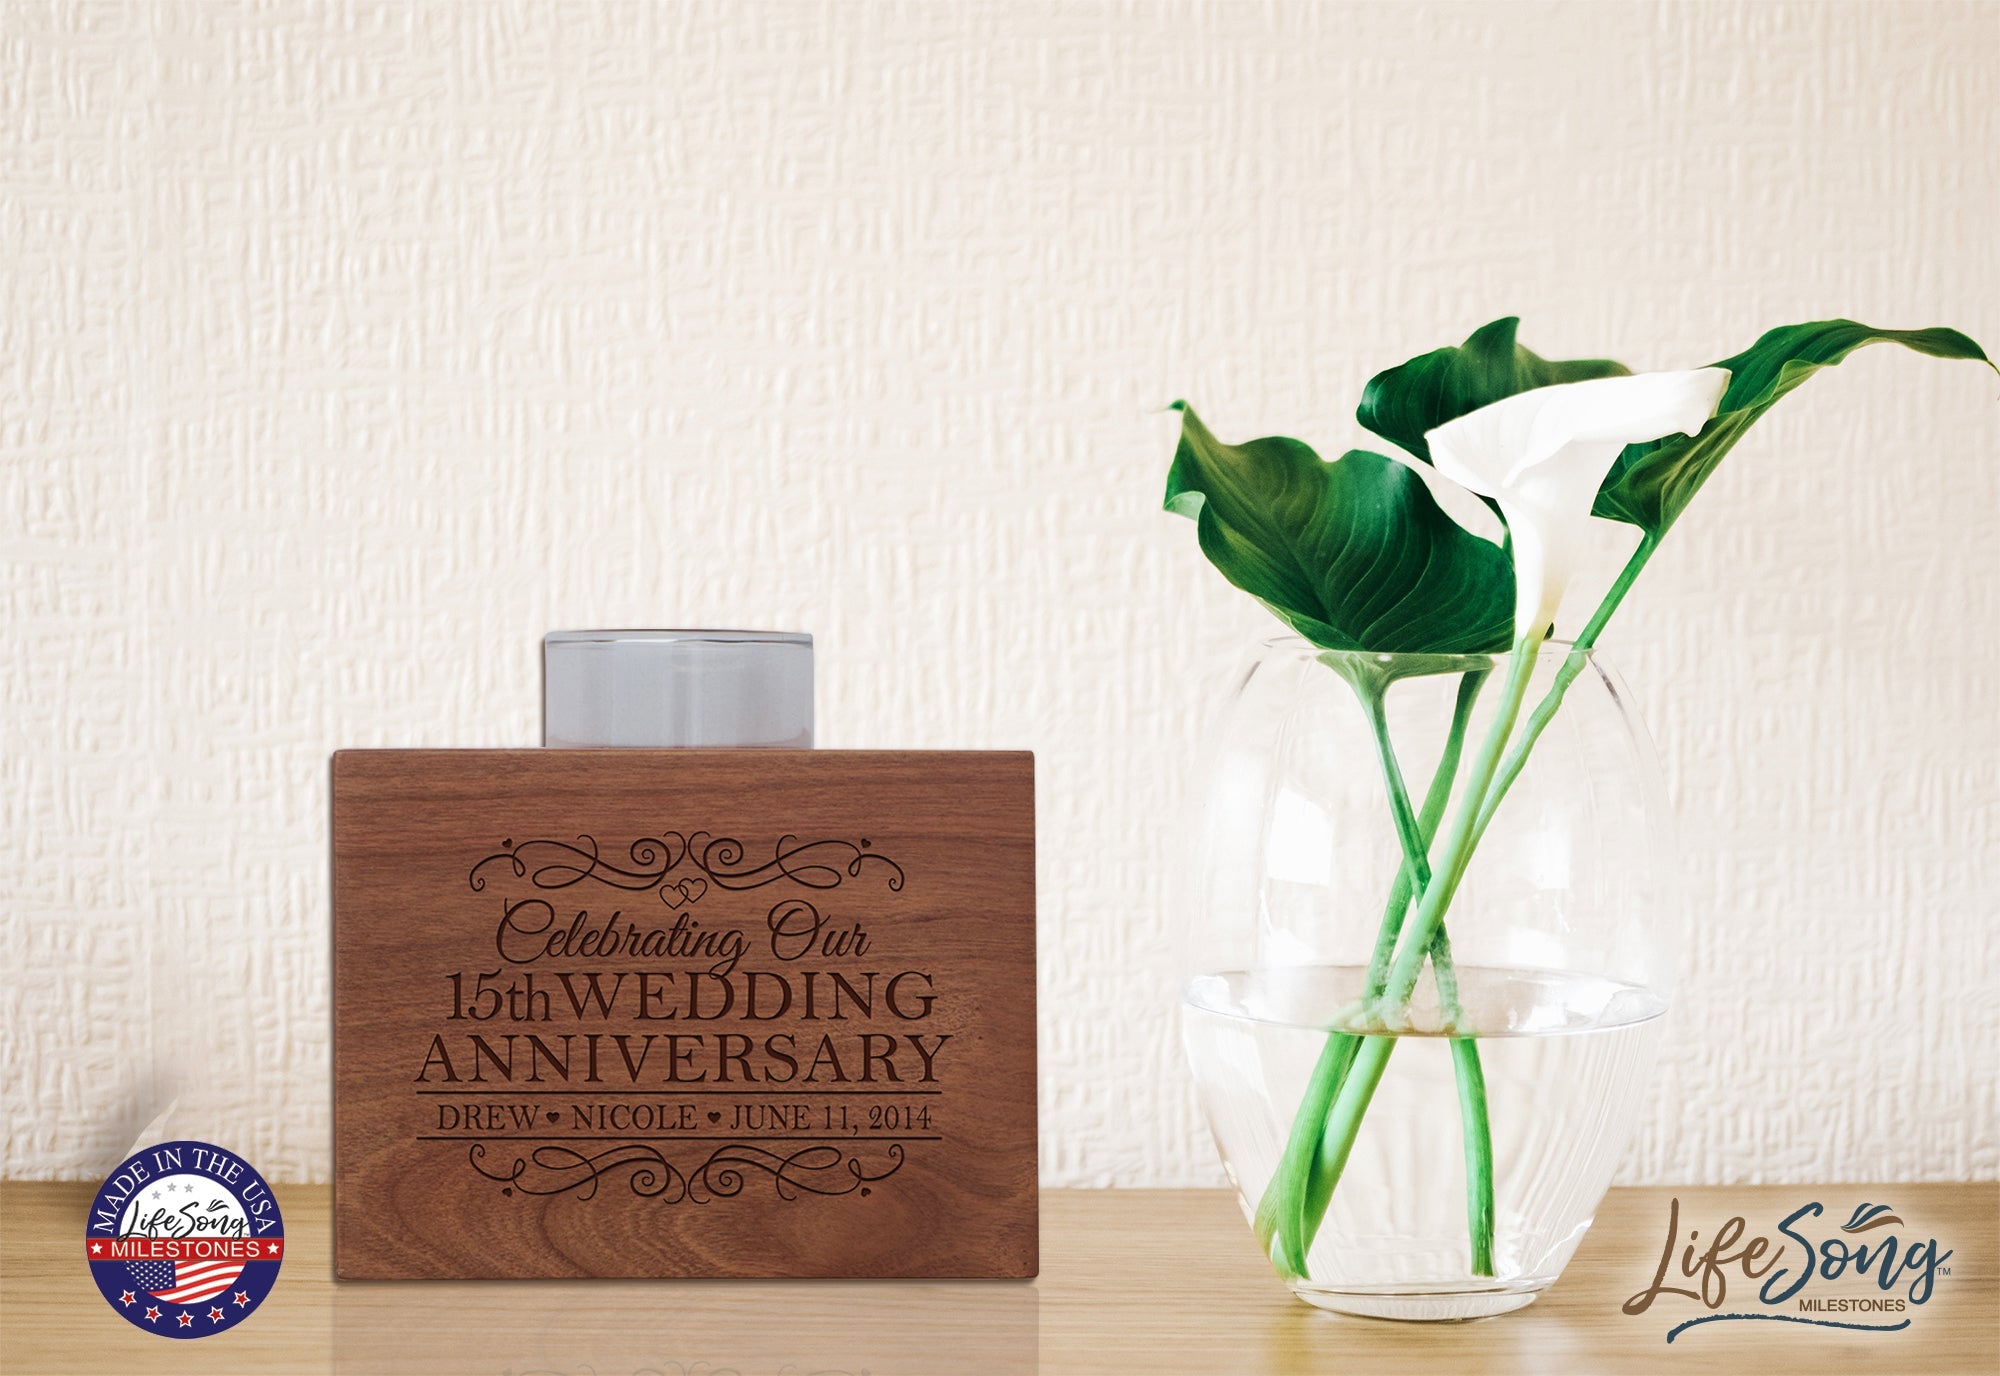 Personalized Cherry Wood Single Votive Candle Holder - 15th Wedding Anniversary - LifeSong Milestones